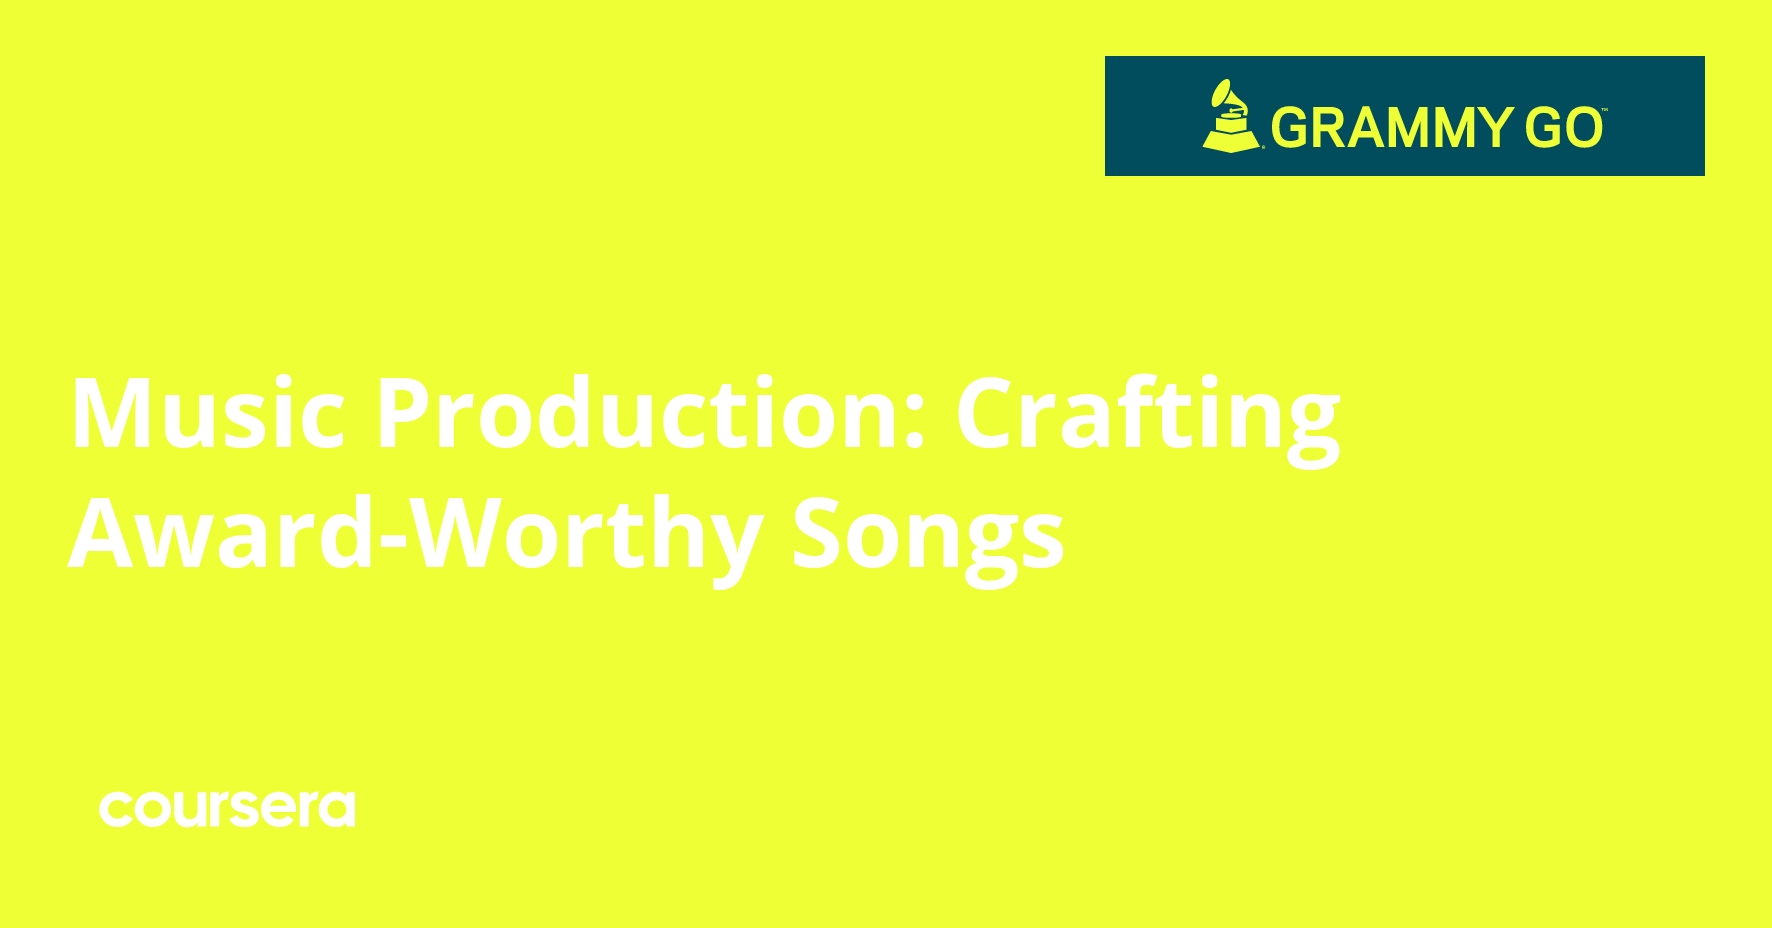 Music Production: Crafting Award-Worthy Songs